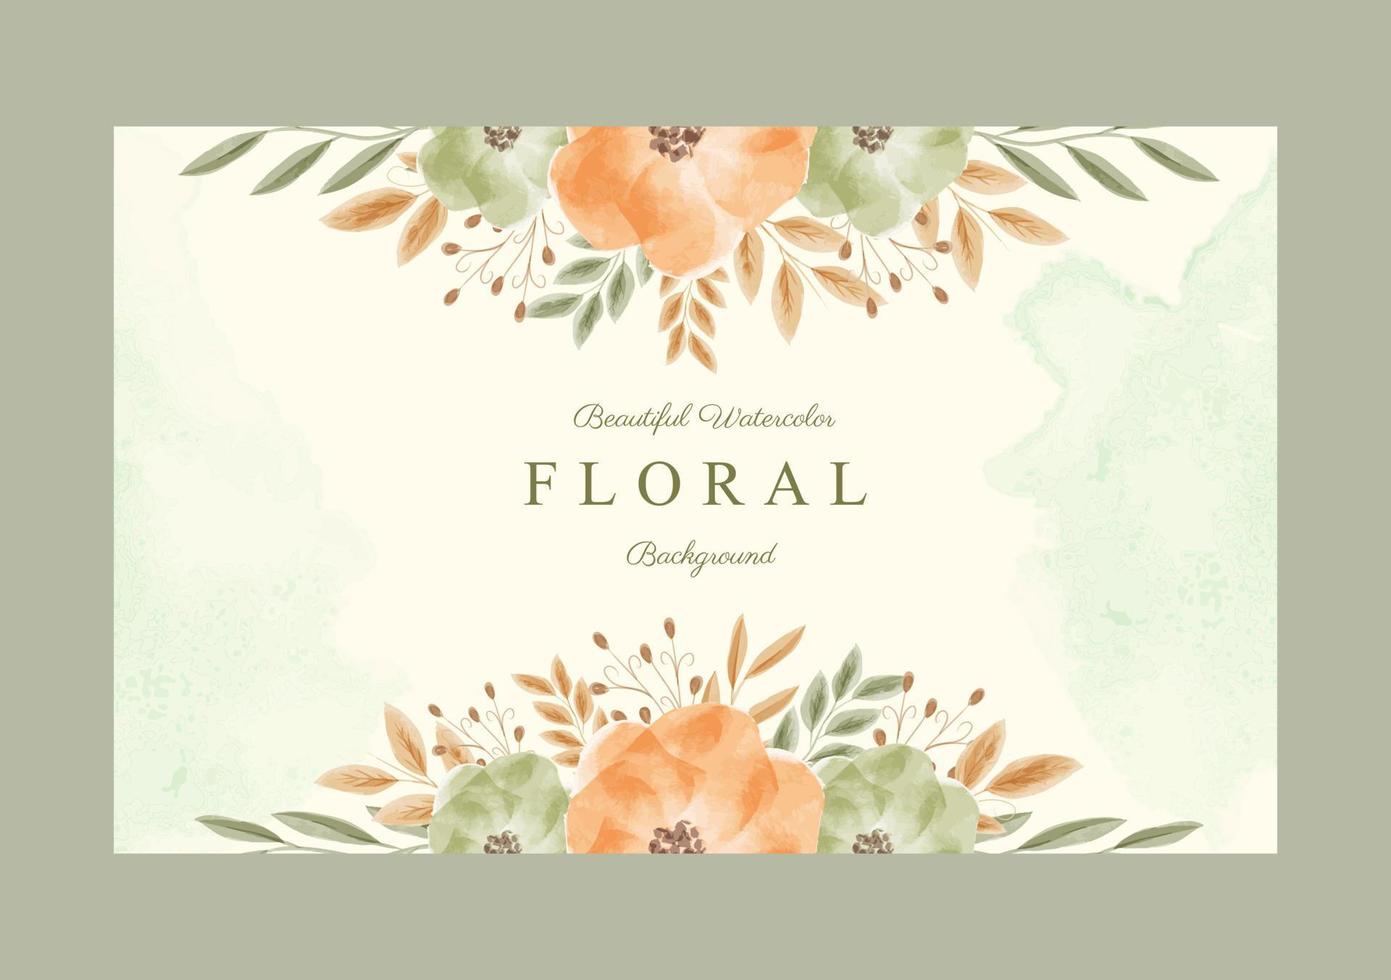 Beautiful watercolor decorative floral background vector